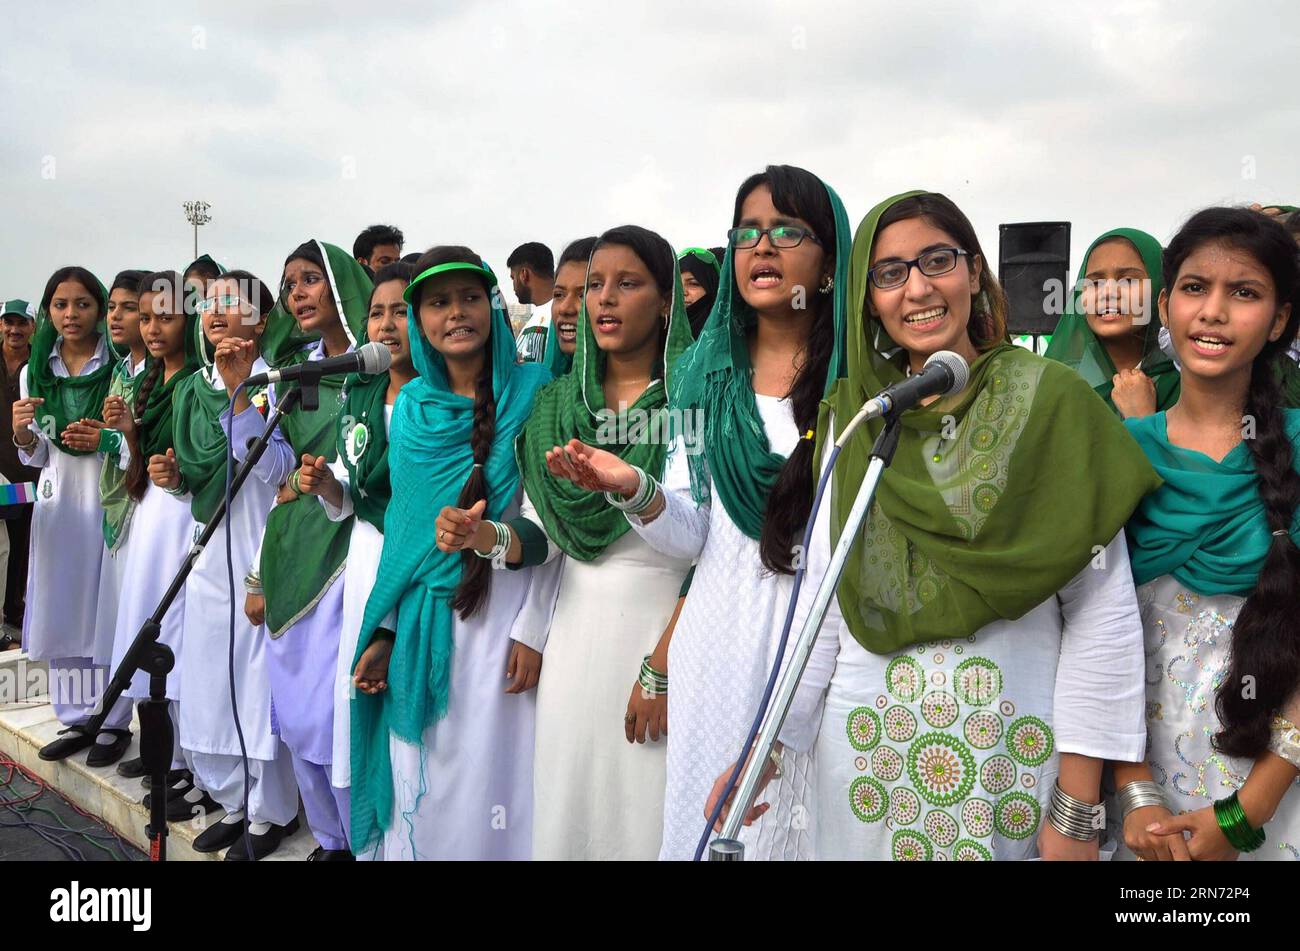 Singers from across Pakistan gather to re-record more 'inclusive' version  of the national anthem for Independence Day - Culture - Images